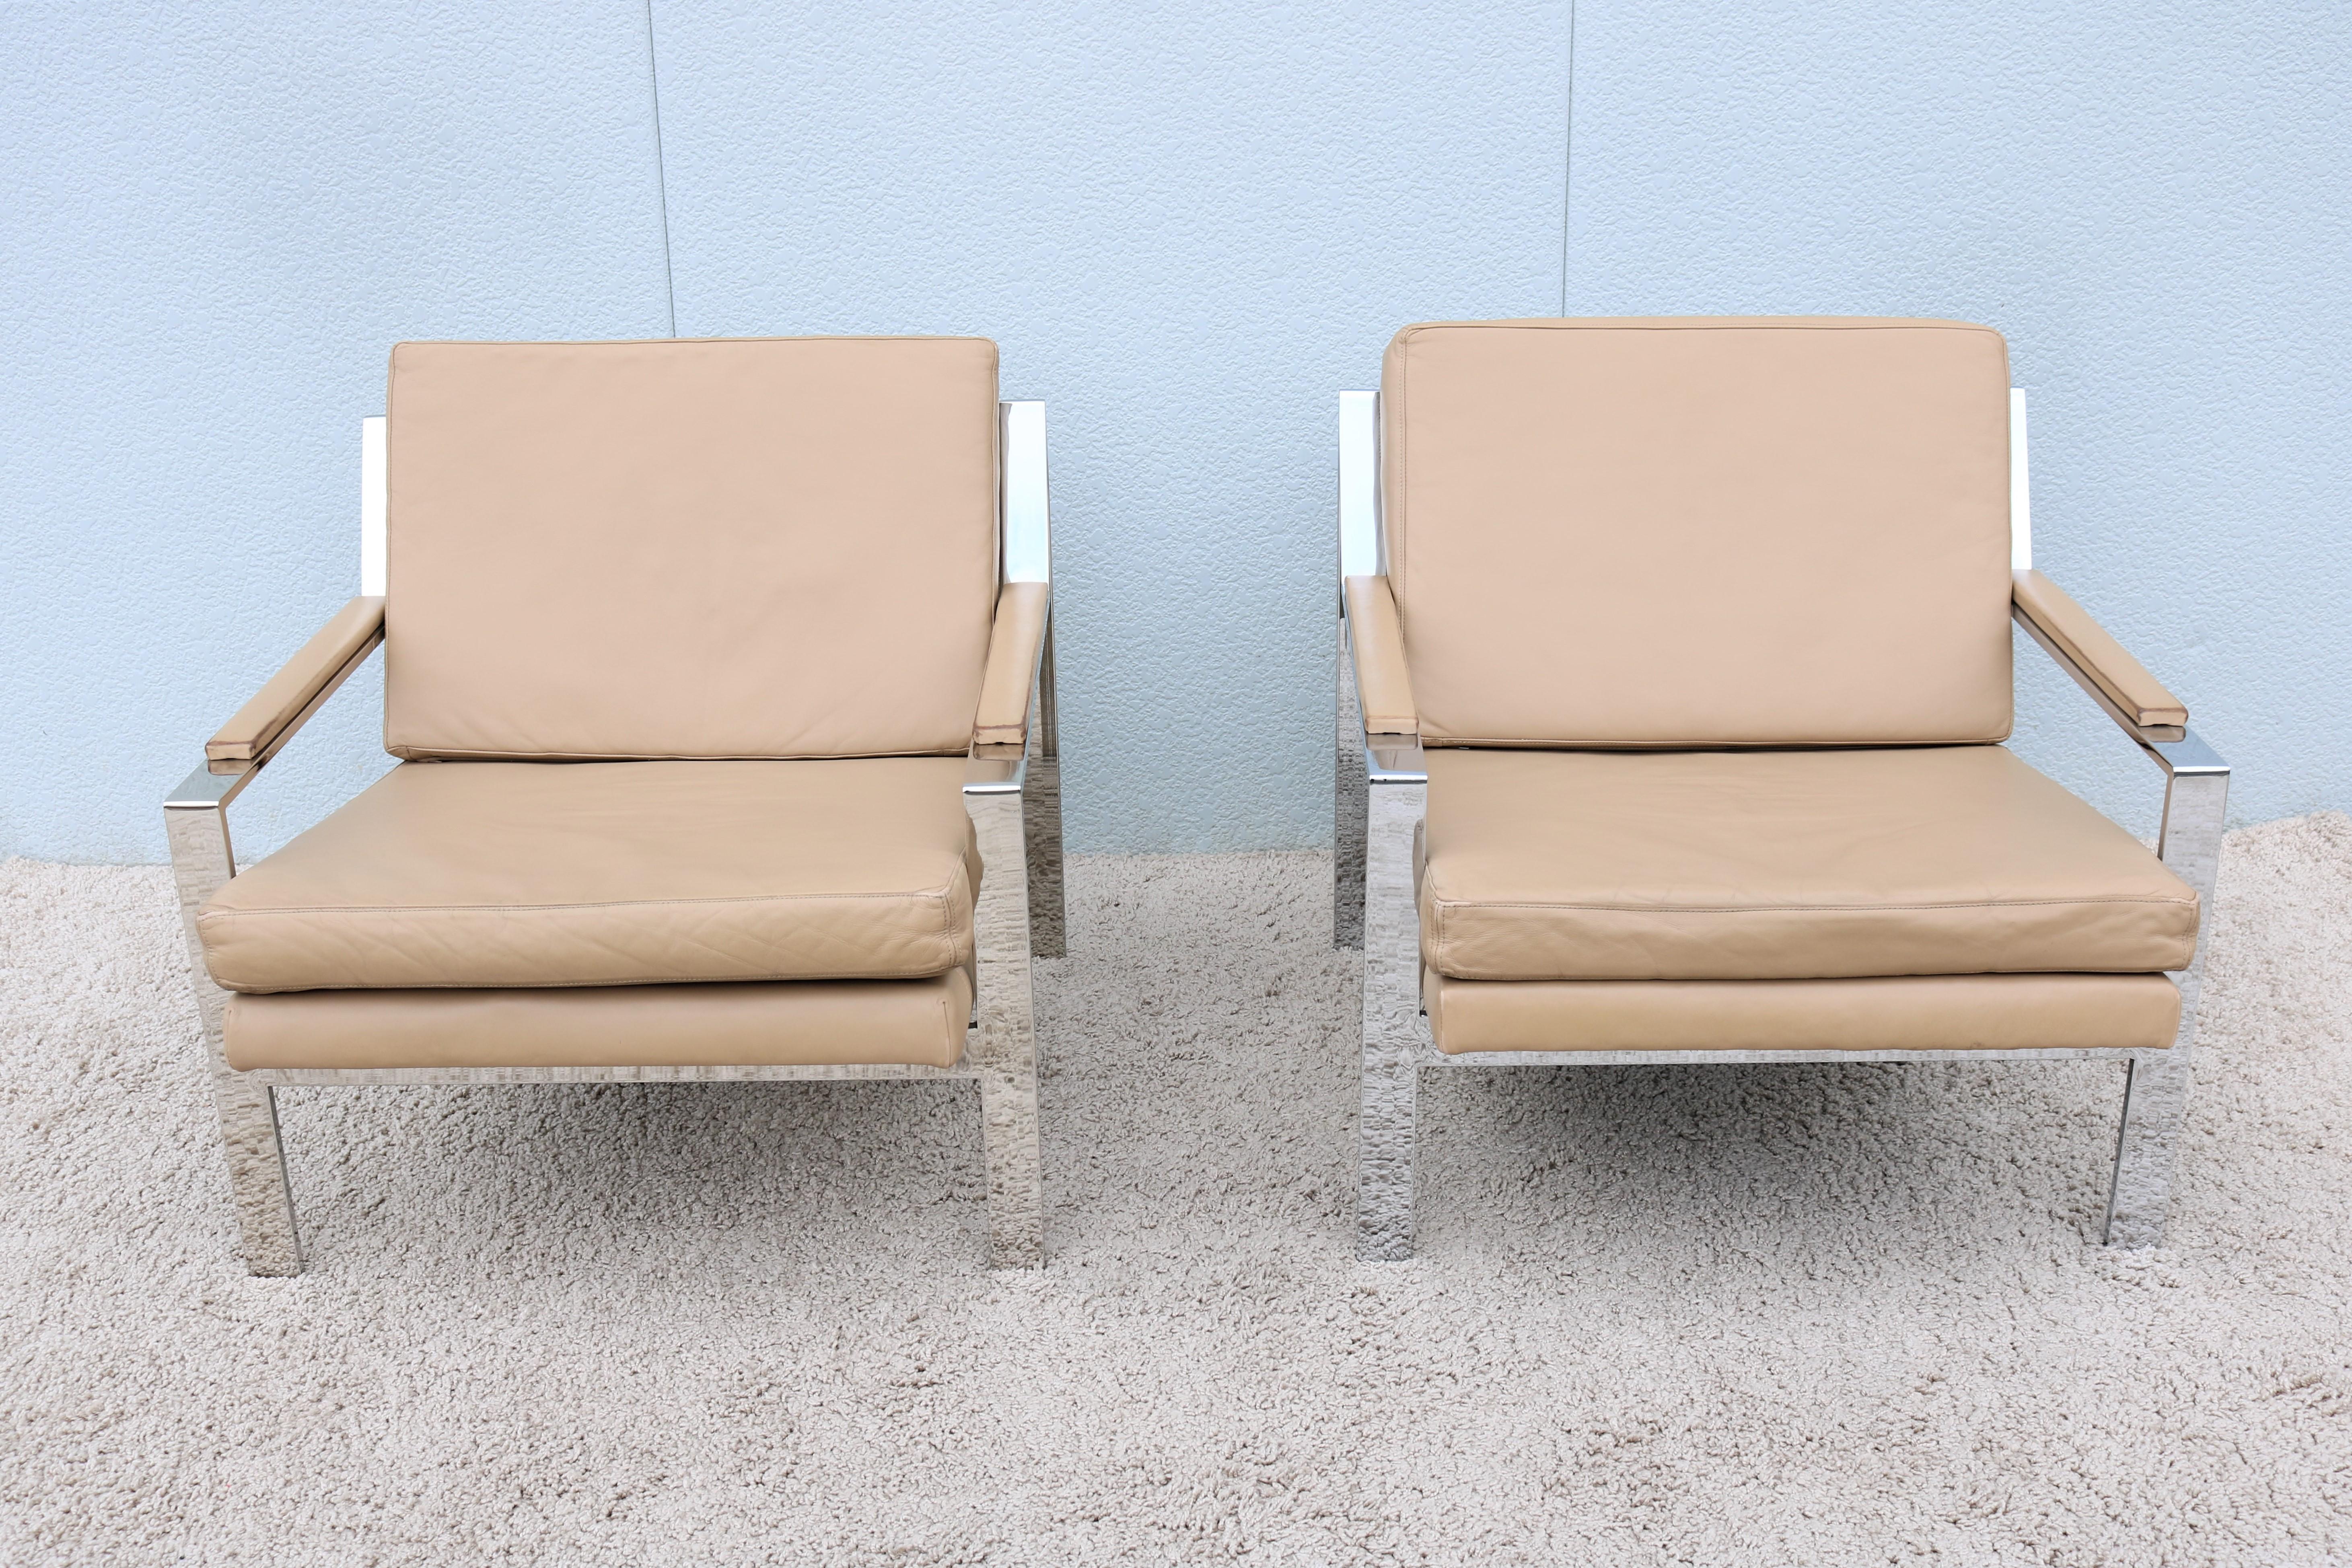 Polished Vintage Cy Mann Leather and Chrome Lounge Chairs in Milo Baughman Style, a Pair For Sale